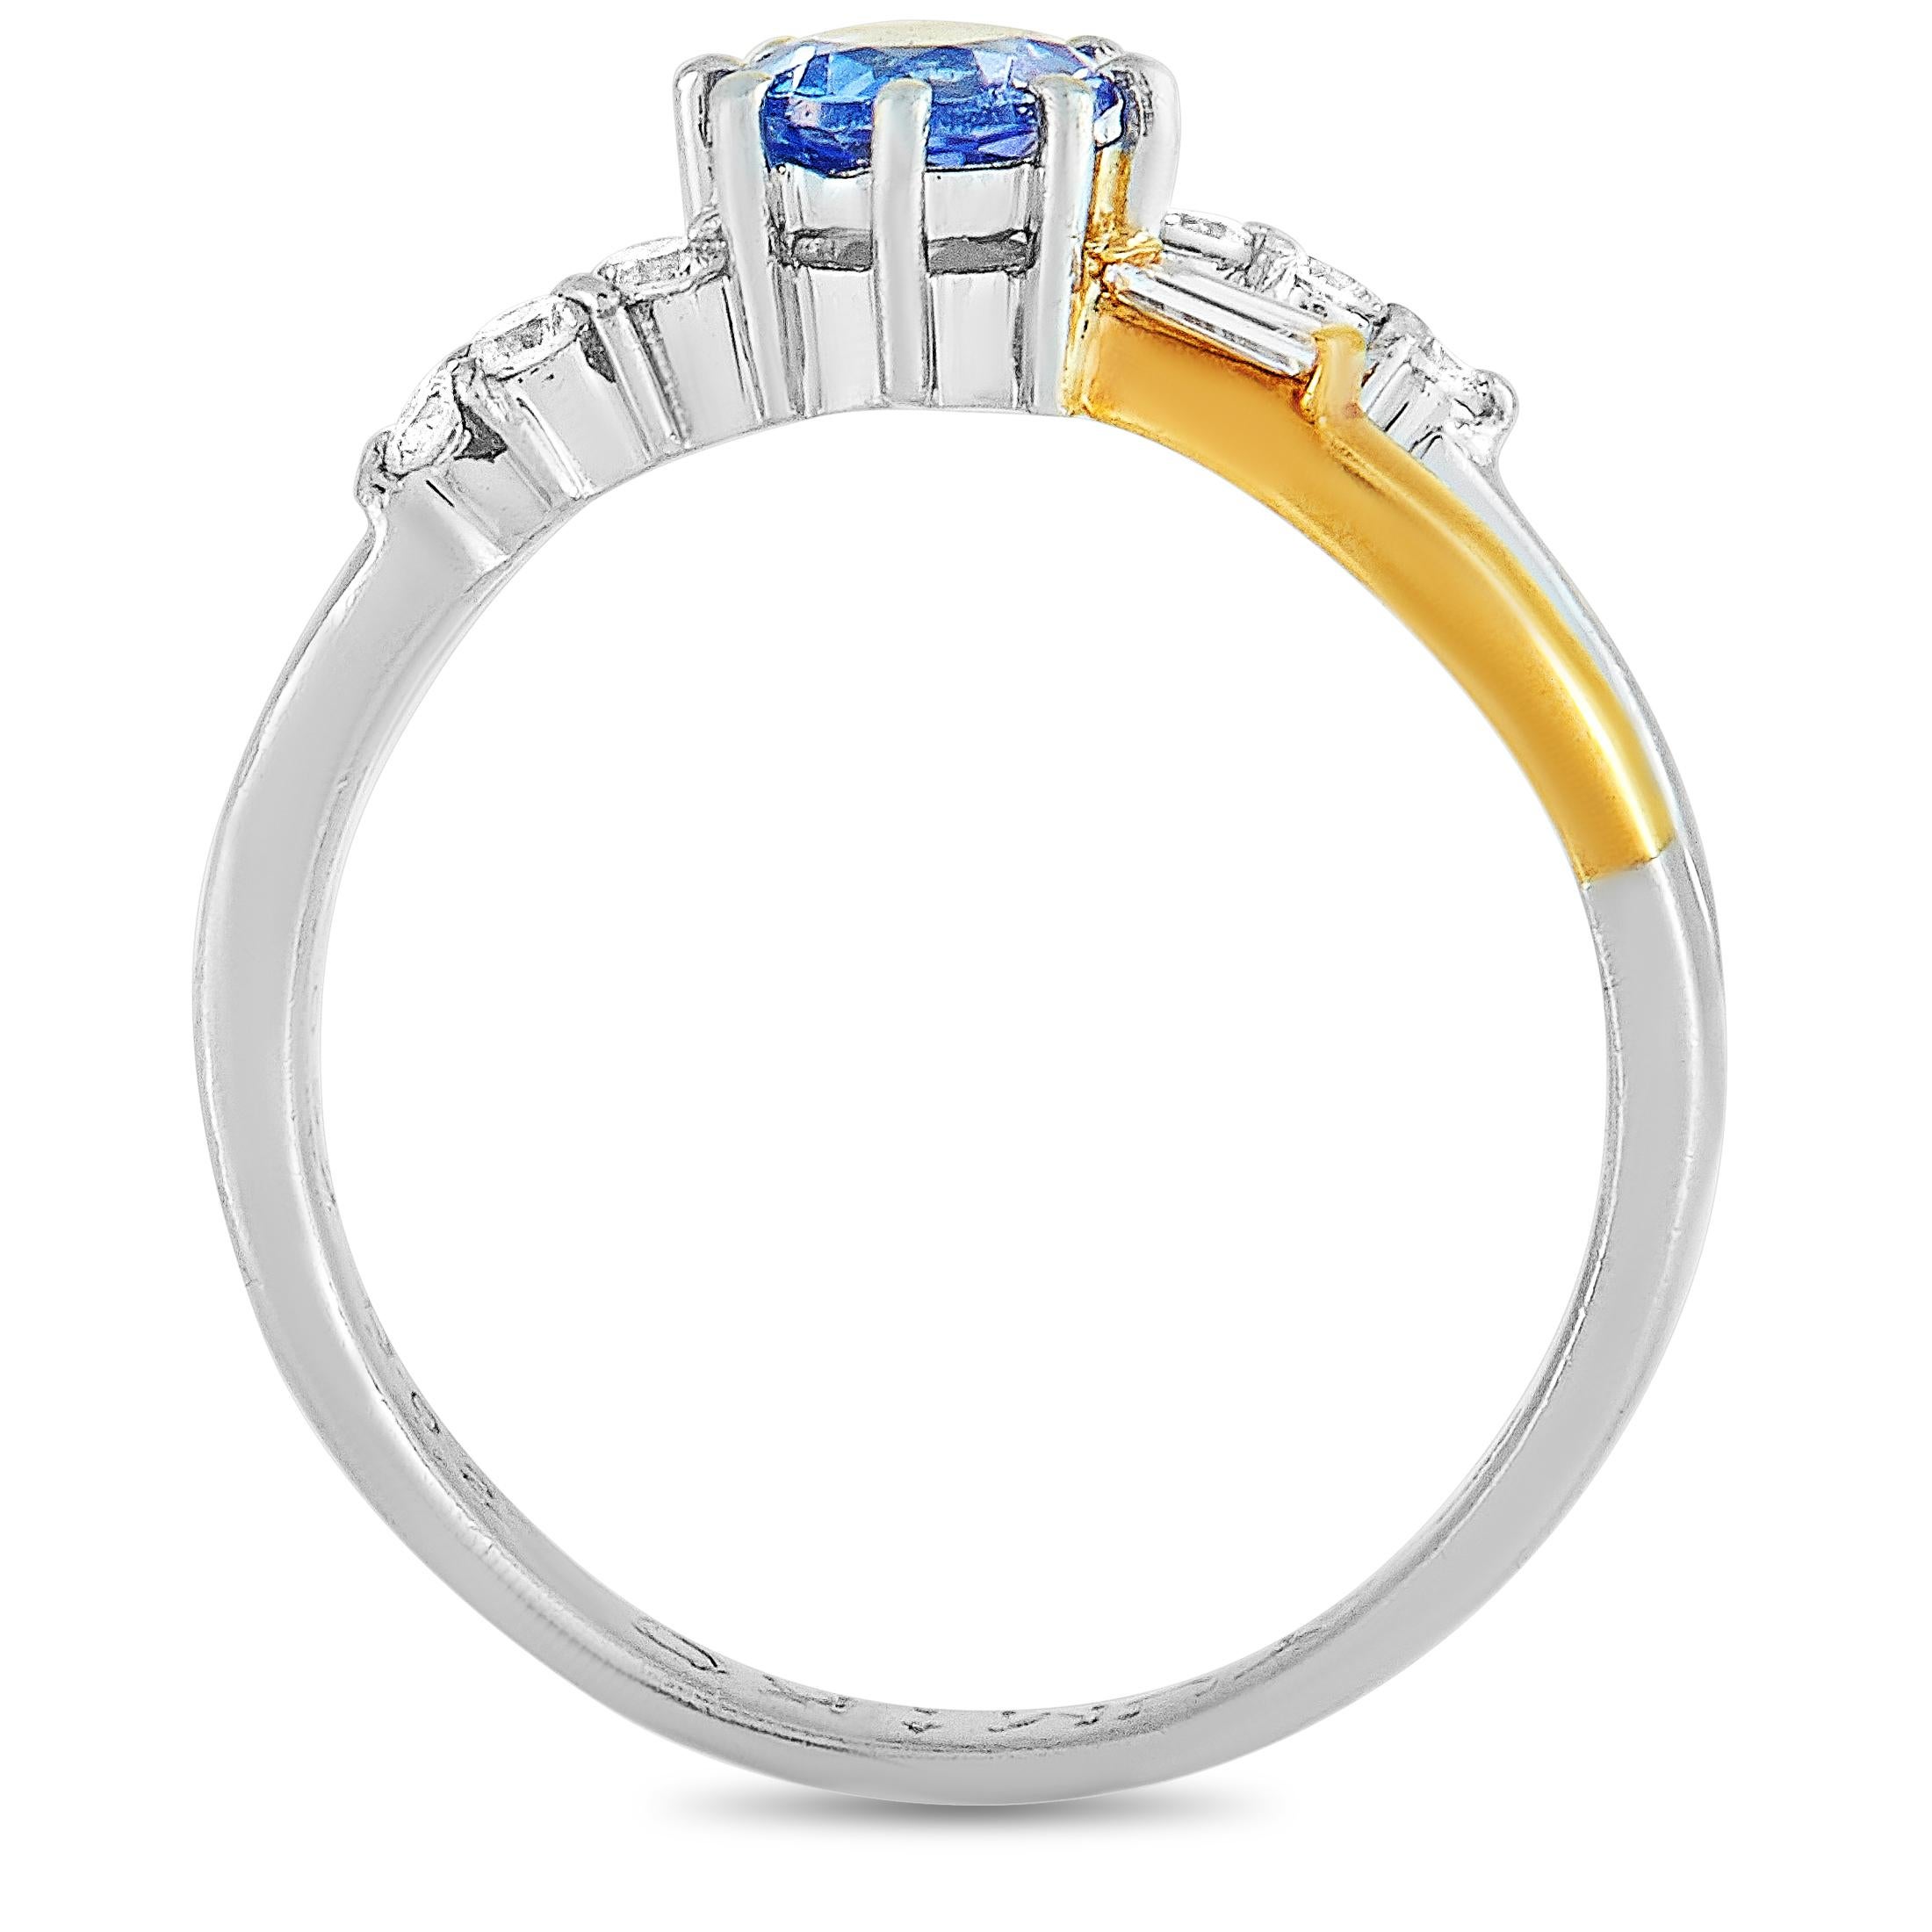 This LB Exclusive ring is made out of platinum and 18K yellow gold and weighs 4.9 grams, boasting band thickness of 2 mm and top height of 5 mm, while top dimensions measure 14 by 5 mm. The ring is set with a total of 0.21 carats of diamonds and a